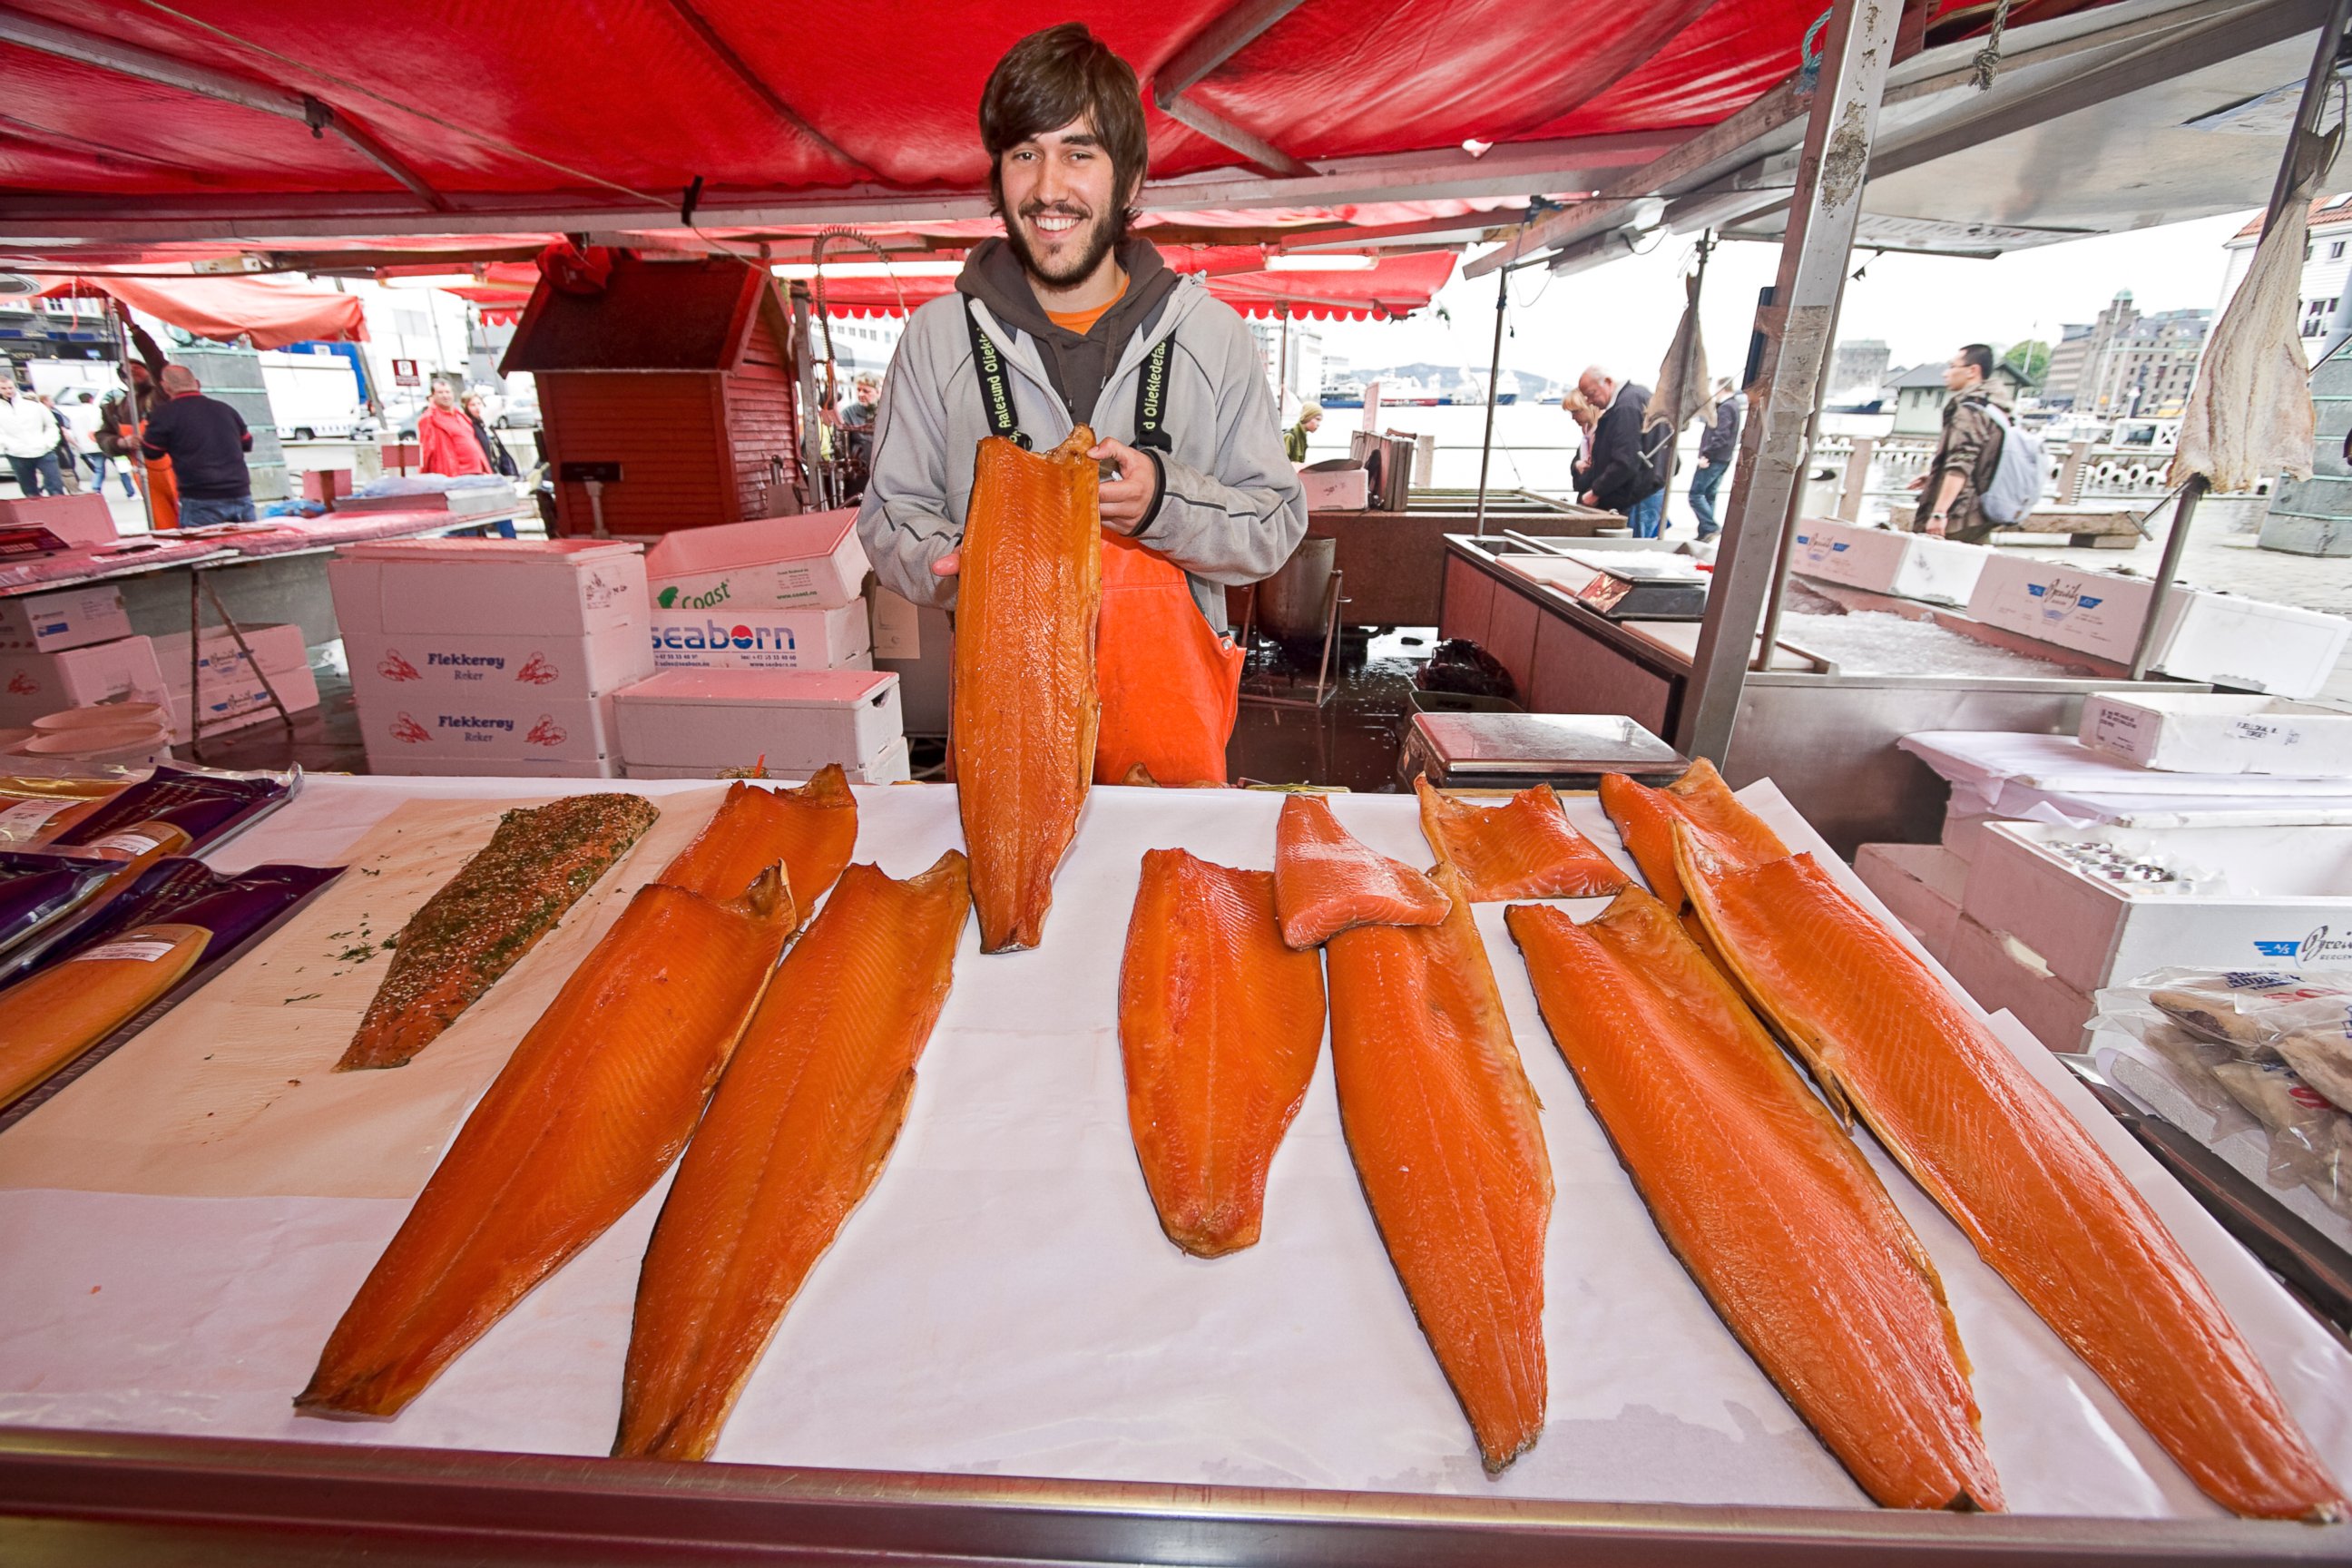 PHOTO: A man offers salmon for sale at the waterfront fish market in Bergen, Norway.